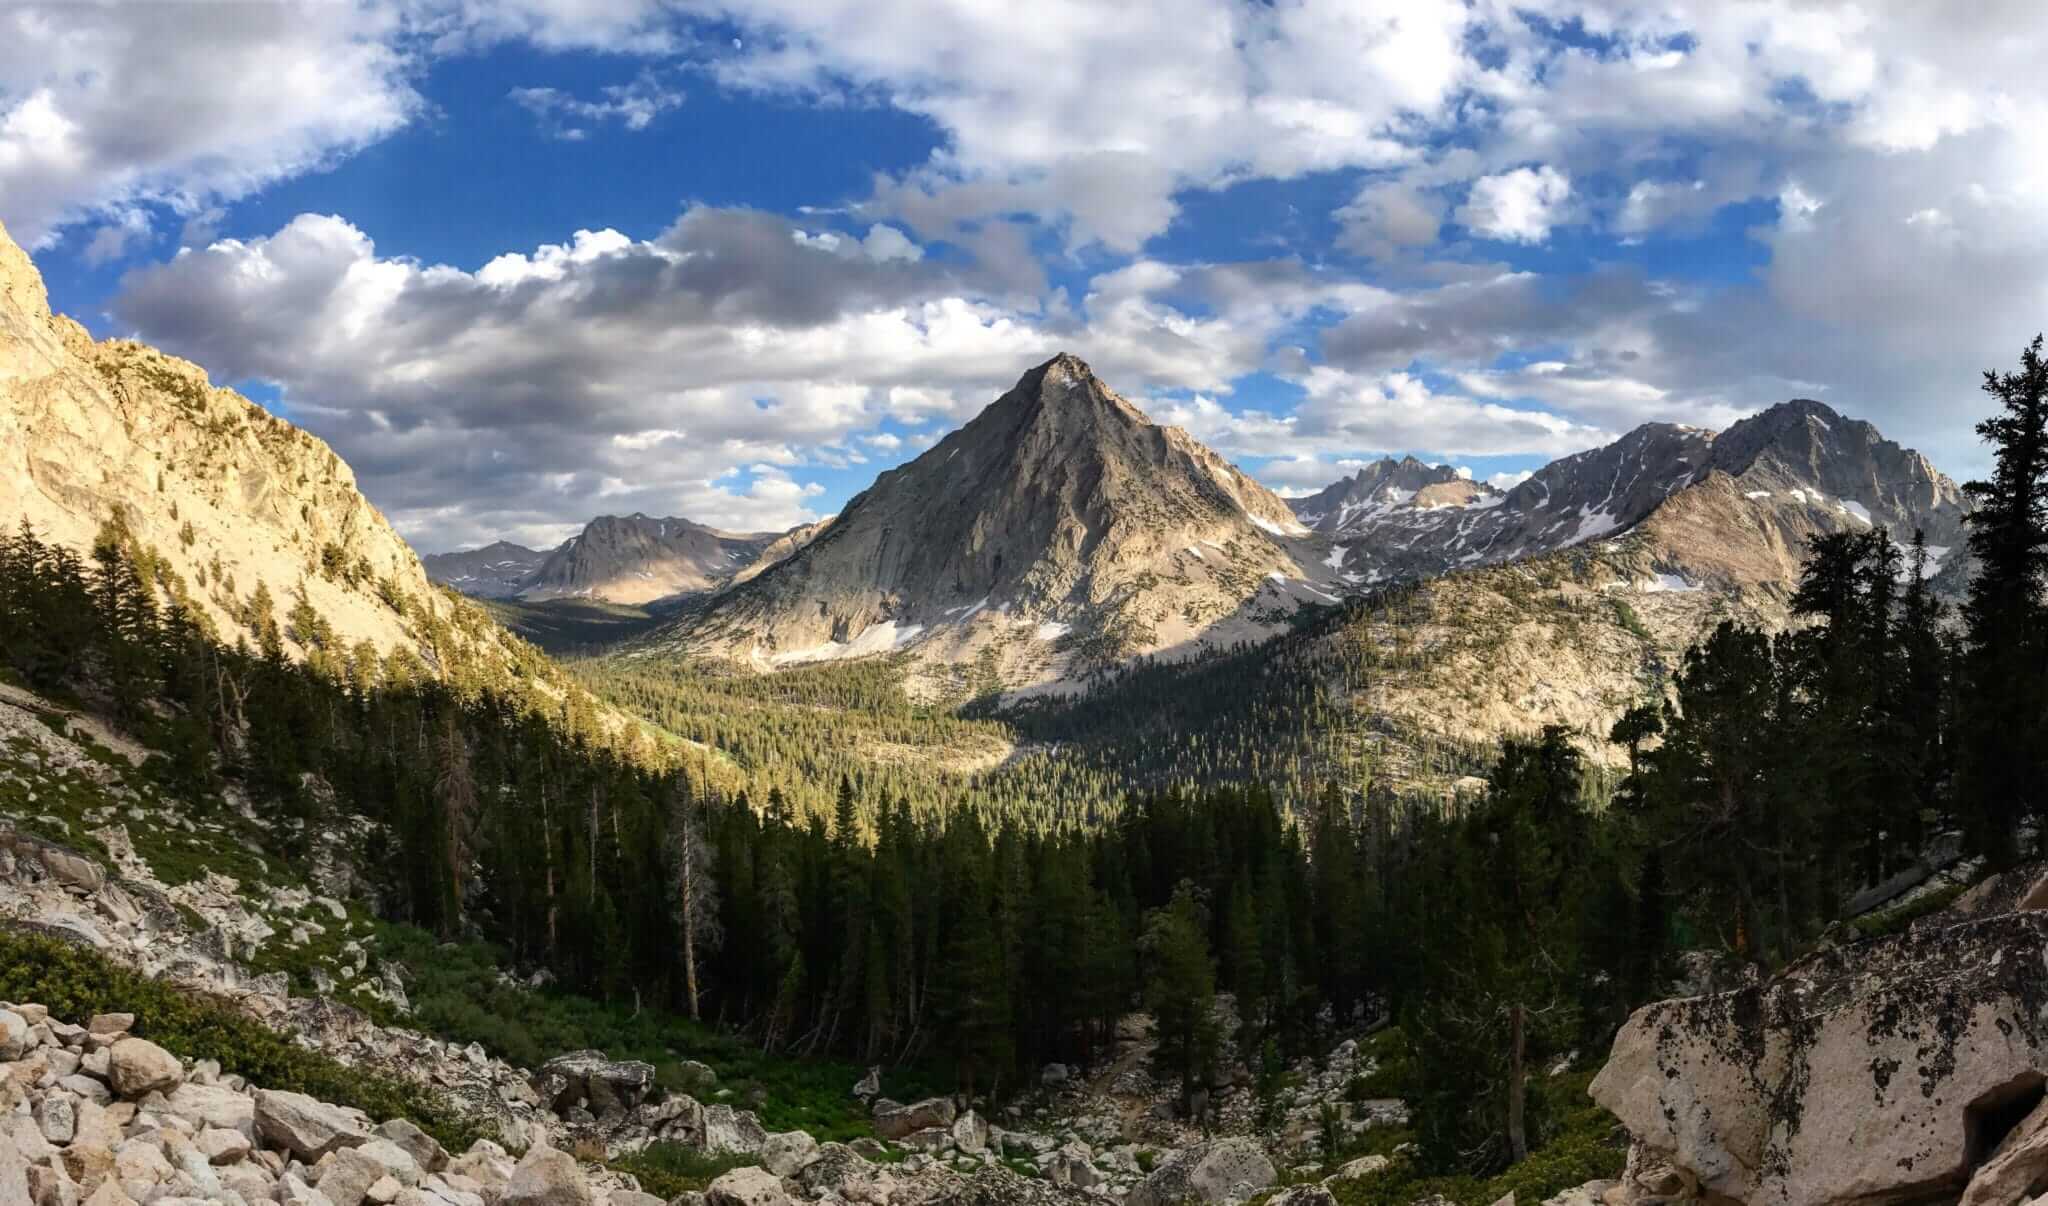 View of mountains and open valley in Kings Canyon National Park